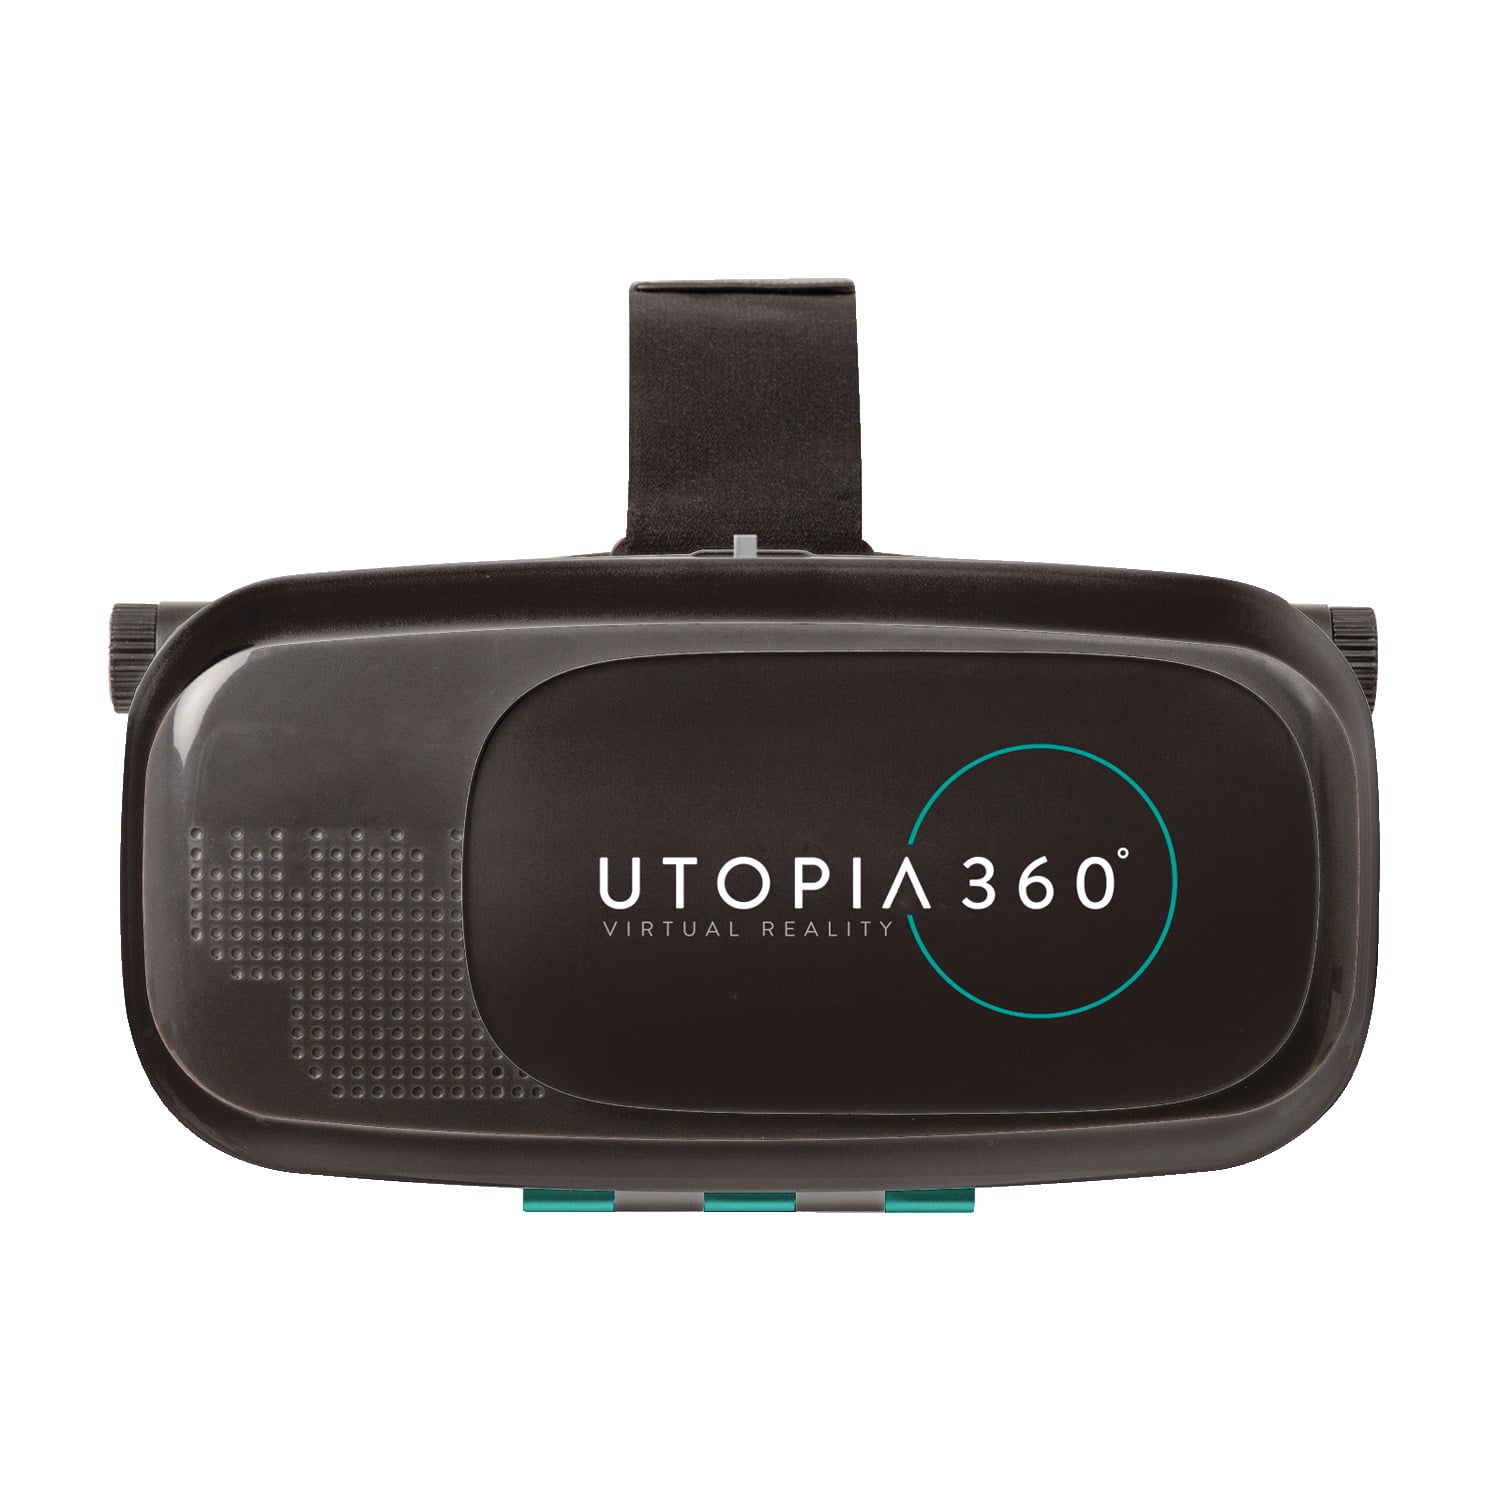 Utopia 360 Virtual Reality Headset with Bluetooth Remote